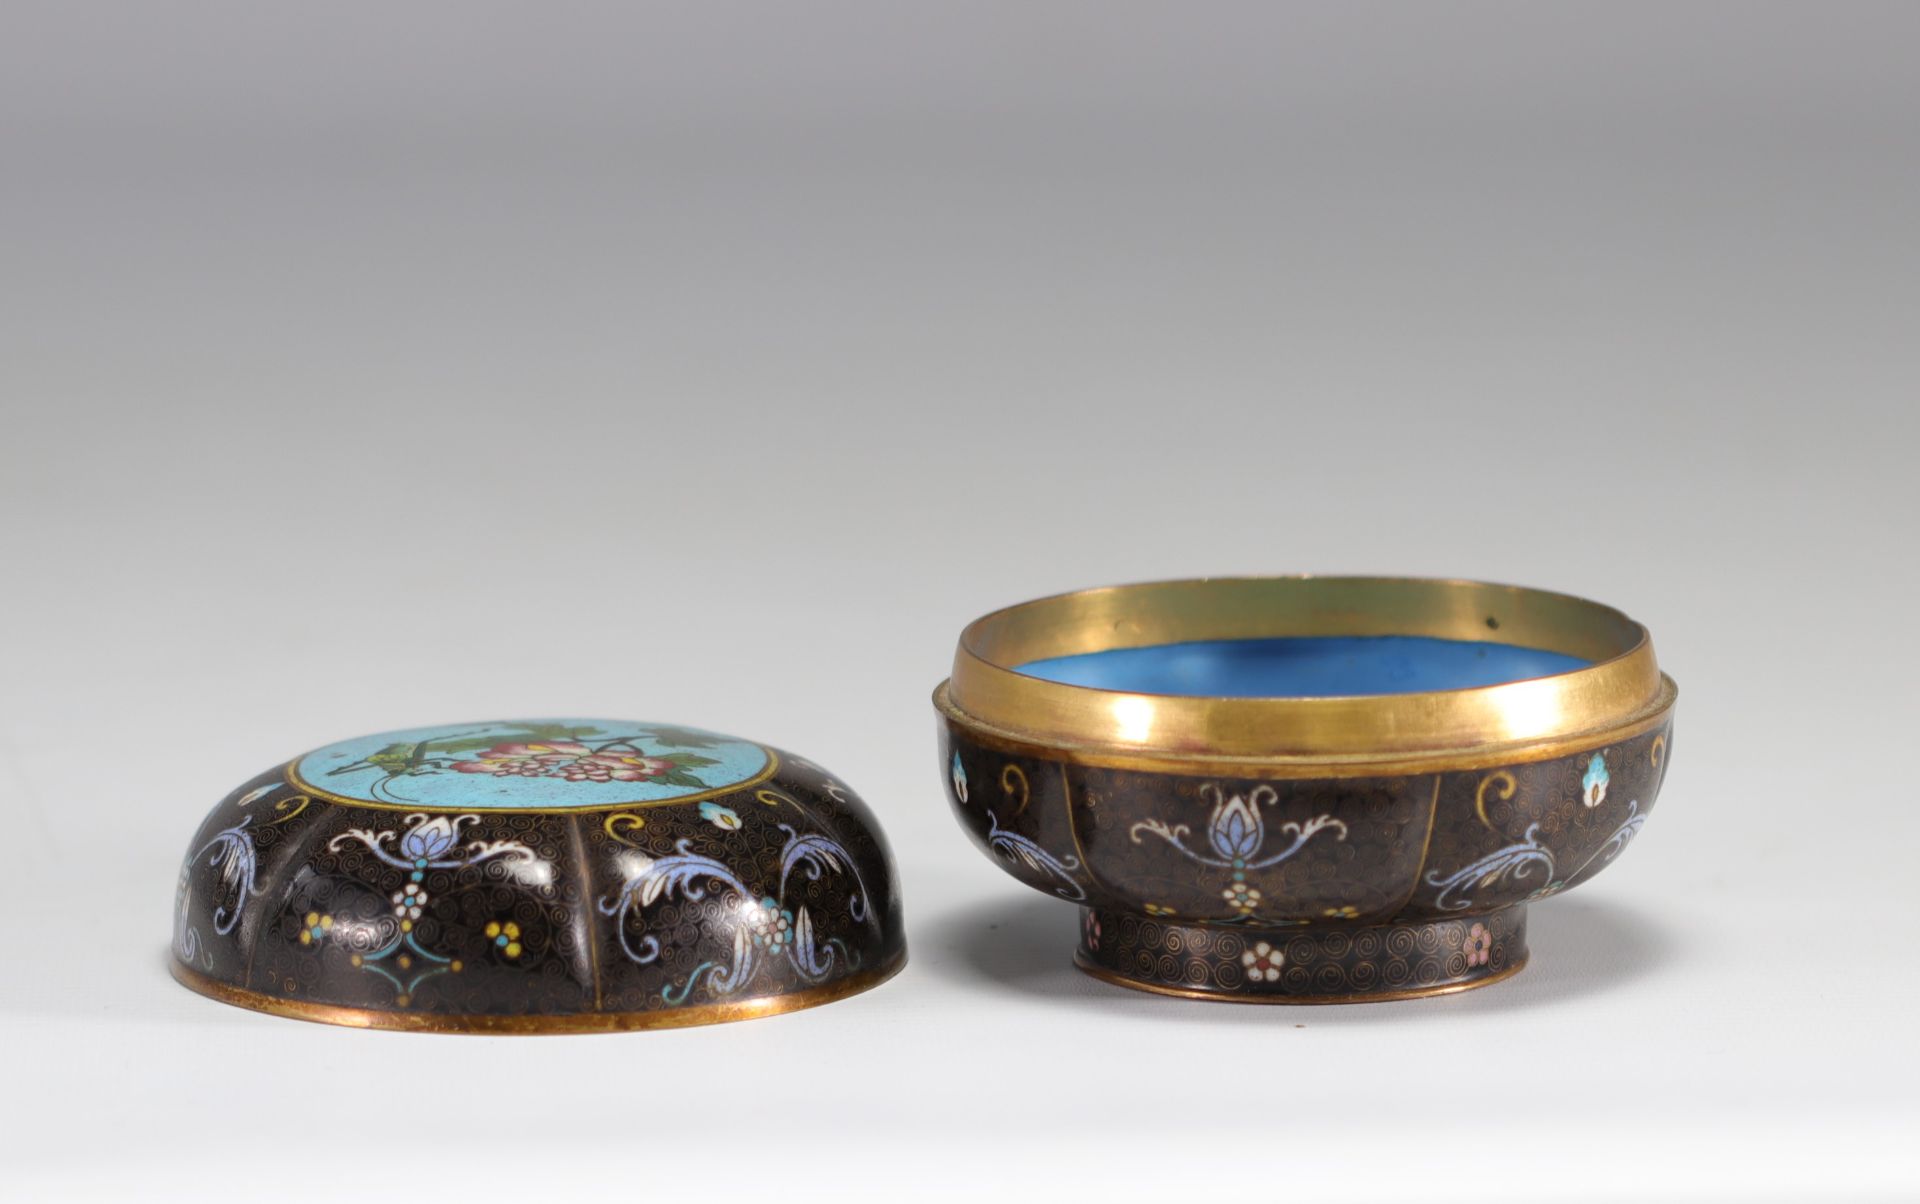 A beautiful cloisonne enamel box decorated with a cricket on a flower from the 19th century from Mei - Image 4 of 5